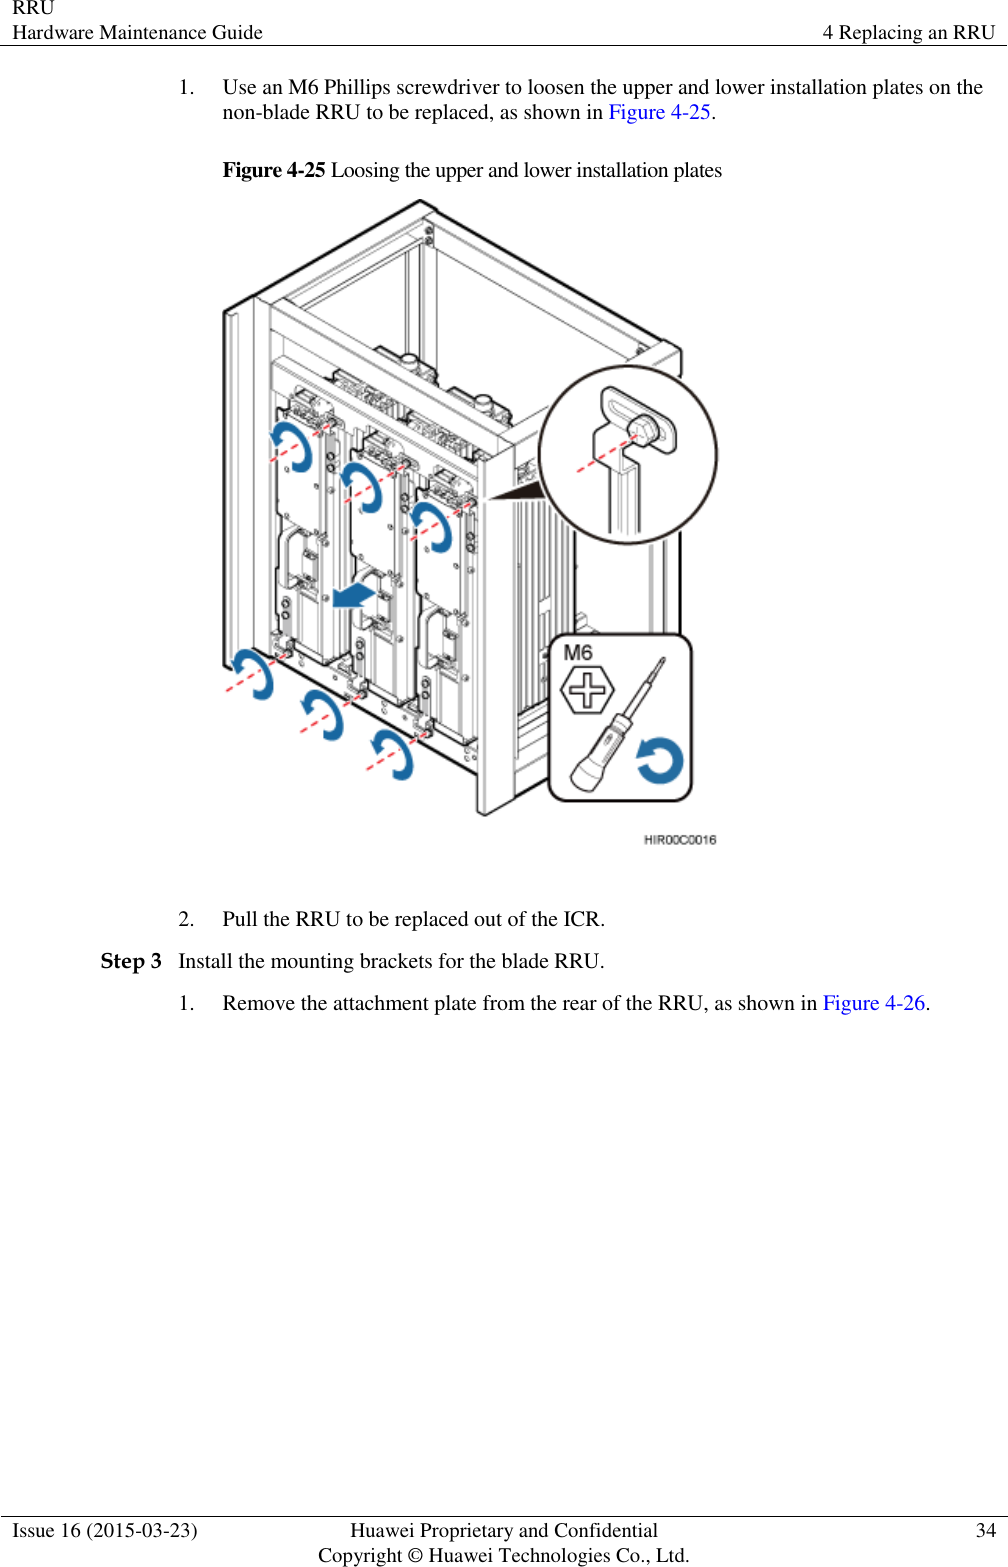 RRU Hardware Maintenance Guide 4 Replacing an RRU  Issue 16 (2015-03-23) Huawei Proprietary and Confidential                                     Copyright © Huawei Technologies Co., Ltd. 34  1. Use an M6 Phillips screwdriver to loosen the upper and lower installation plates on the non-blade RRU to be replaced, as shown in Figure 4-25. Figure 4-25 Loosing the upper and lower installation plates   2. Pull the RRU to be replaced out of the ICR. Step 3 Install the mounting brackets for the blade RRU. 1. Remove the attachment plate from the rear of the RRU, as shown in Figure 4-26. 